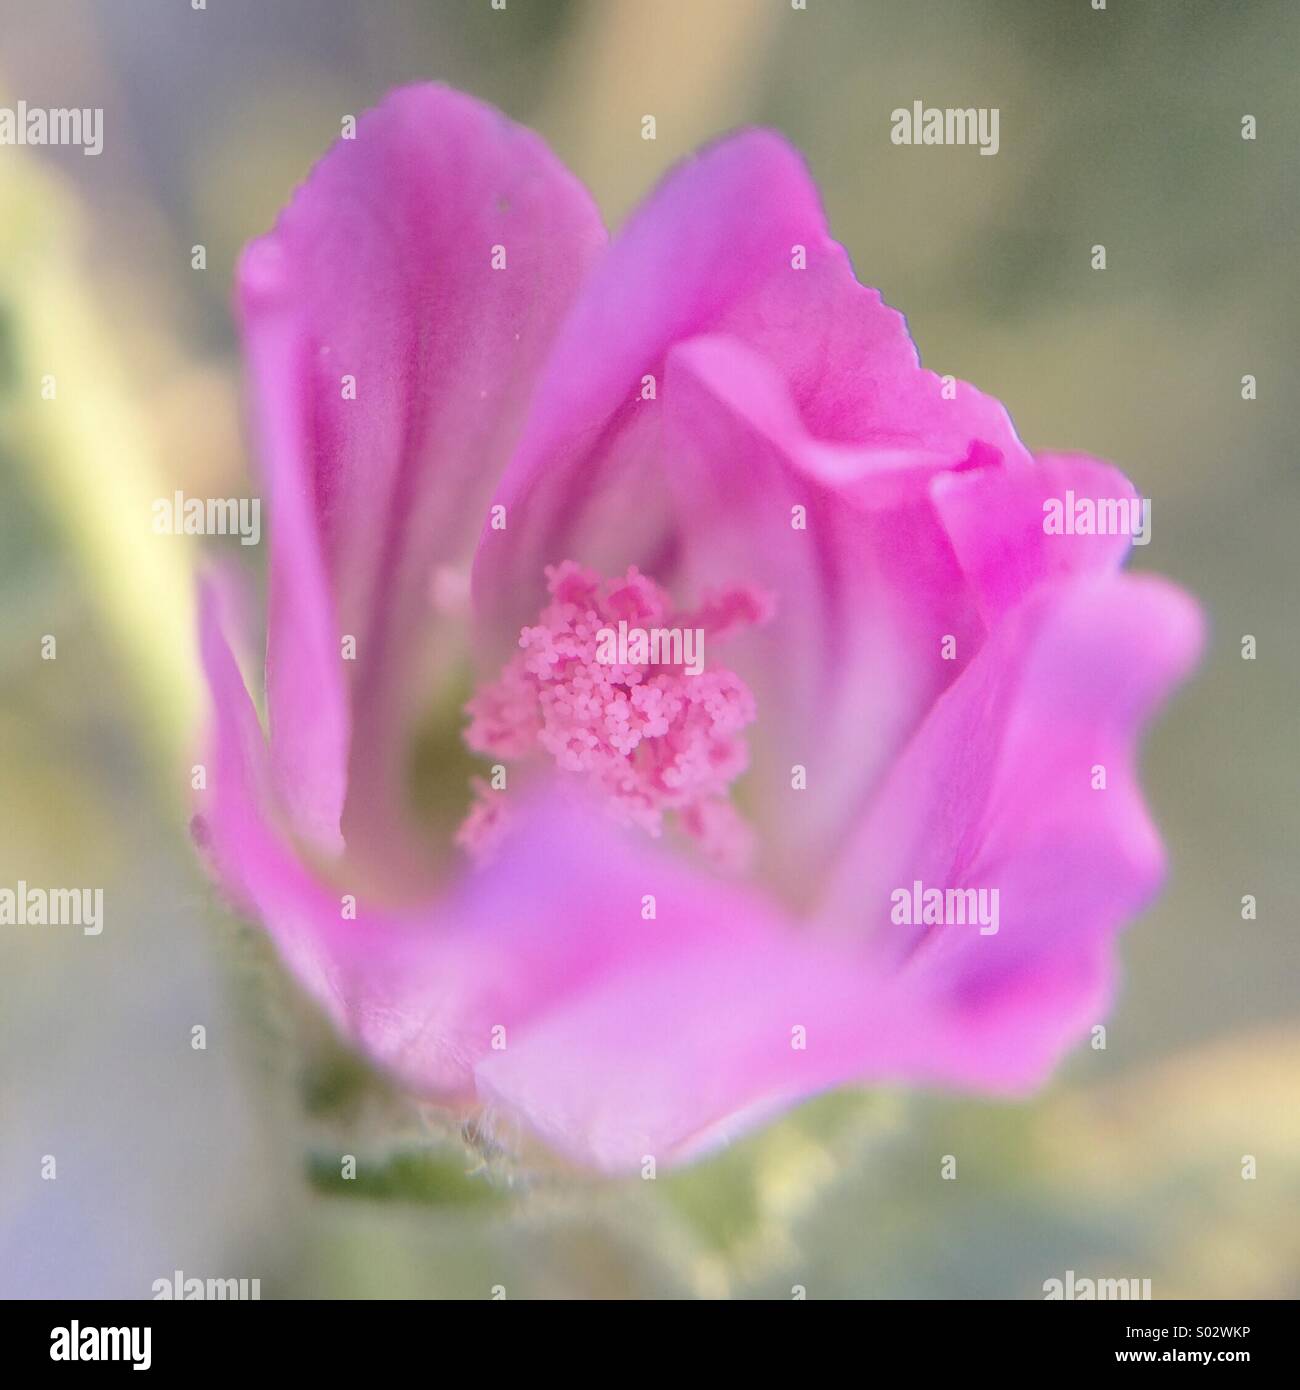 Macro of a little pink flower. Stock Photo